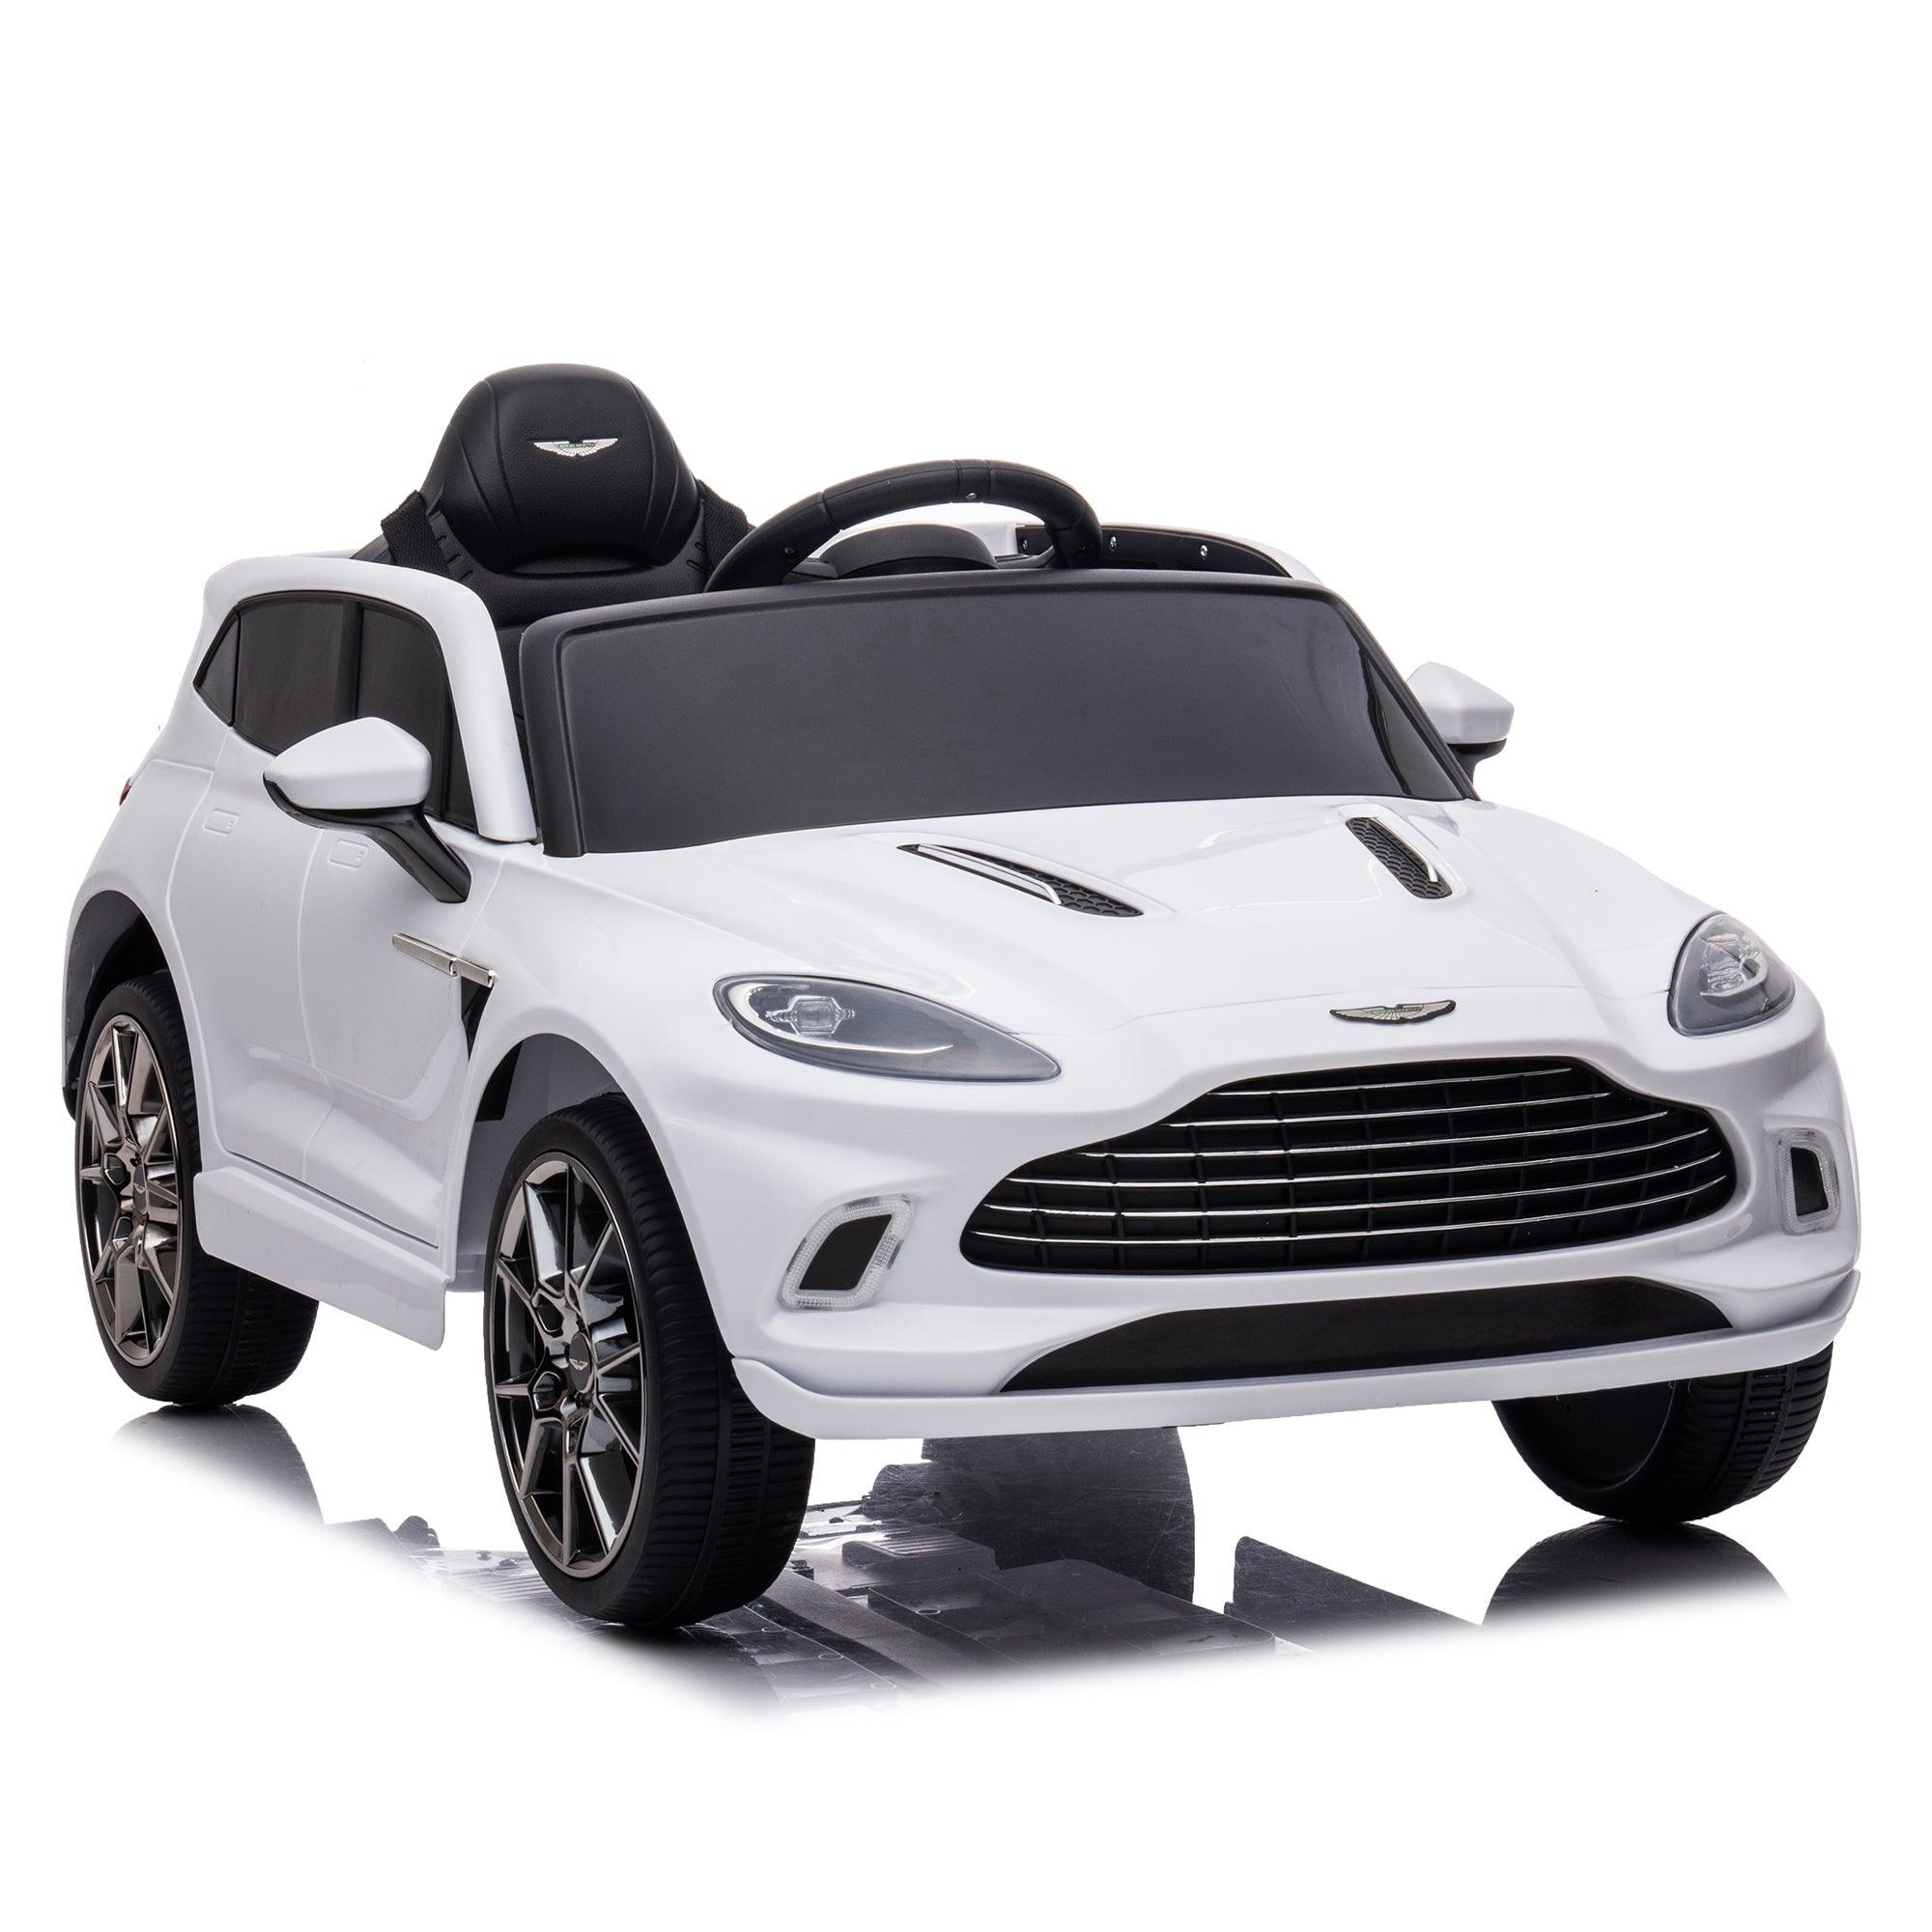 12V Dual-Drive Kids Ride-On Car Remote Control Electric Battery Powered, Music, USB, White LamCham